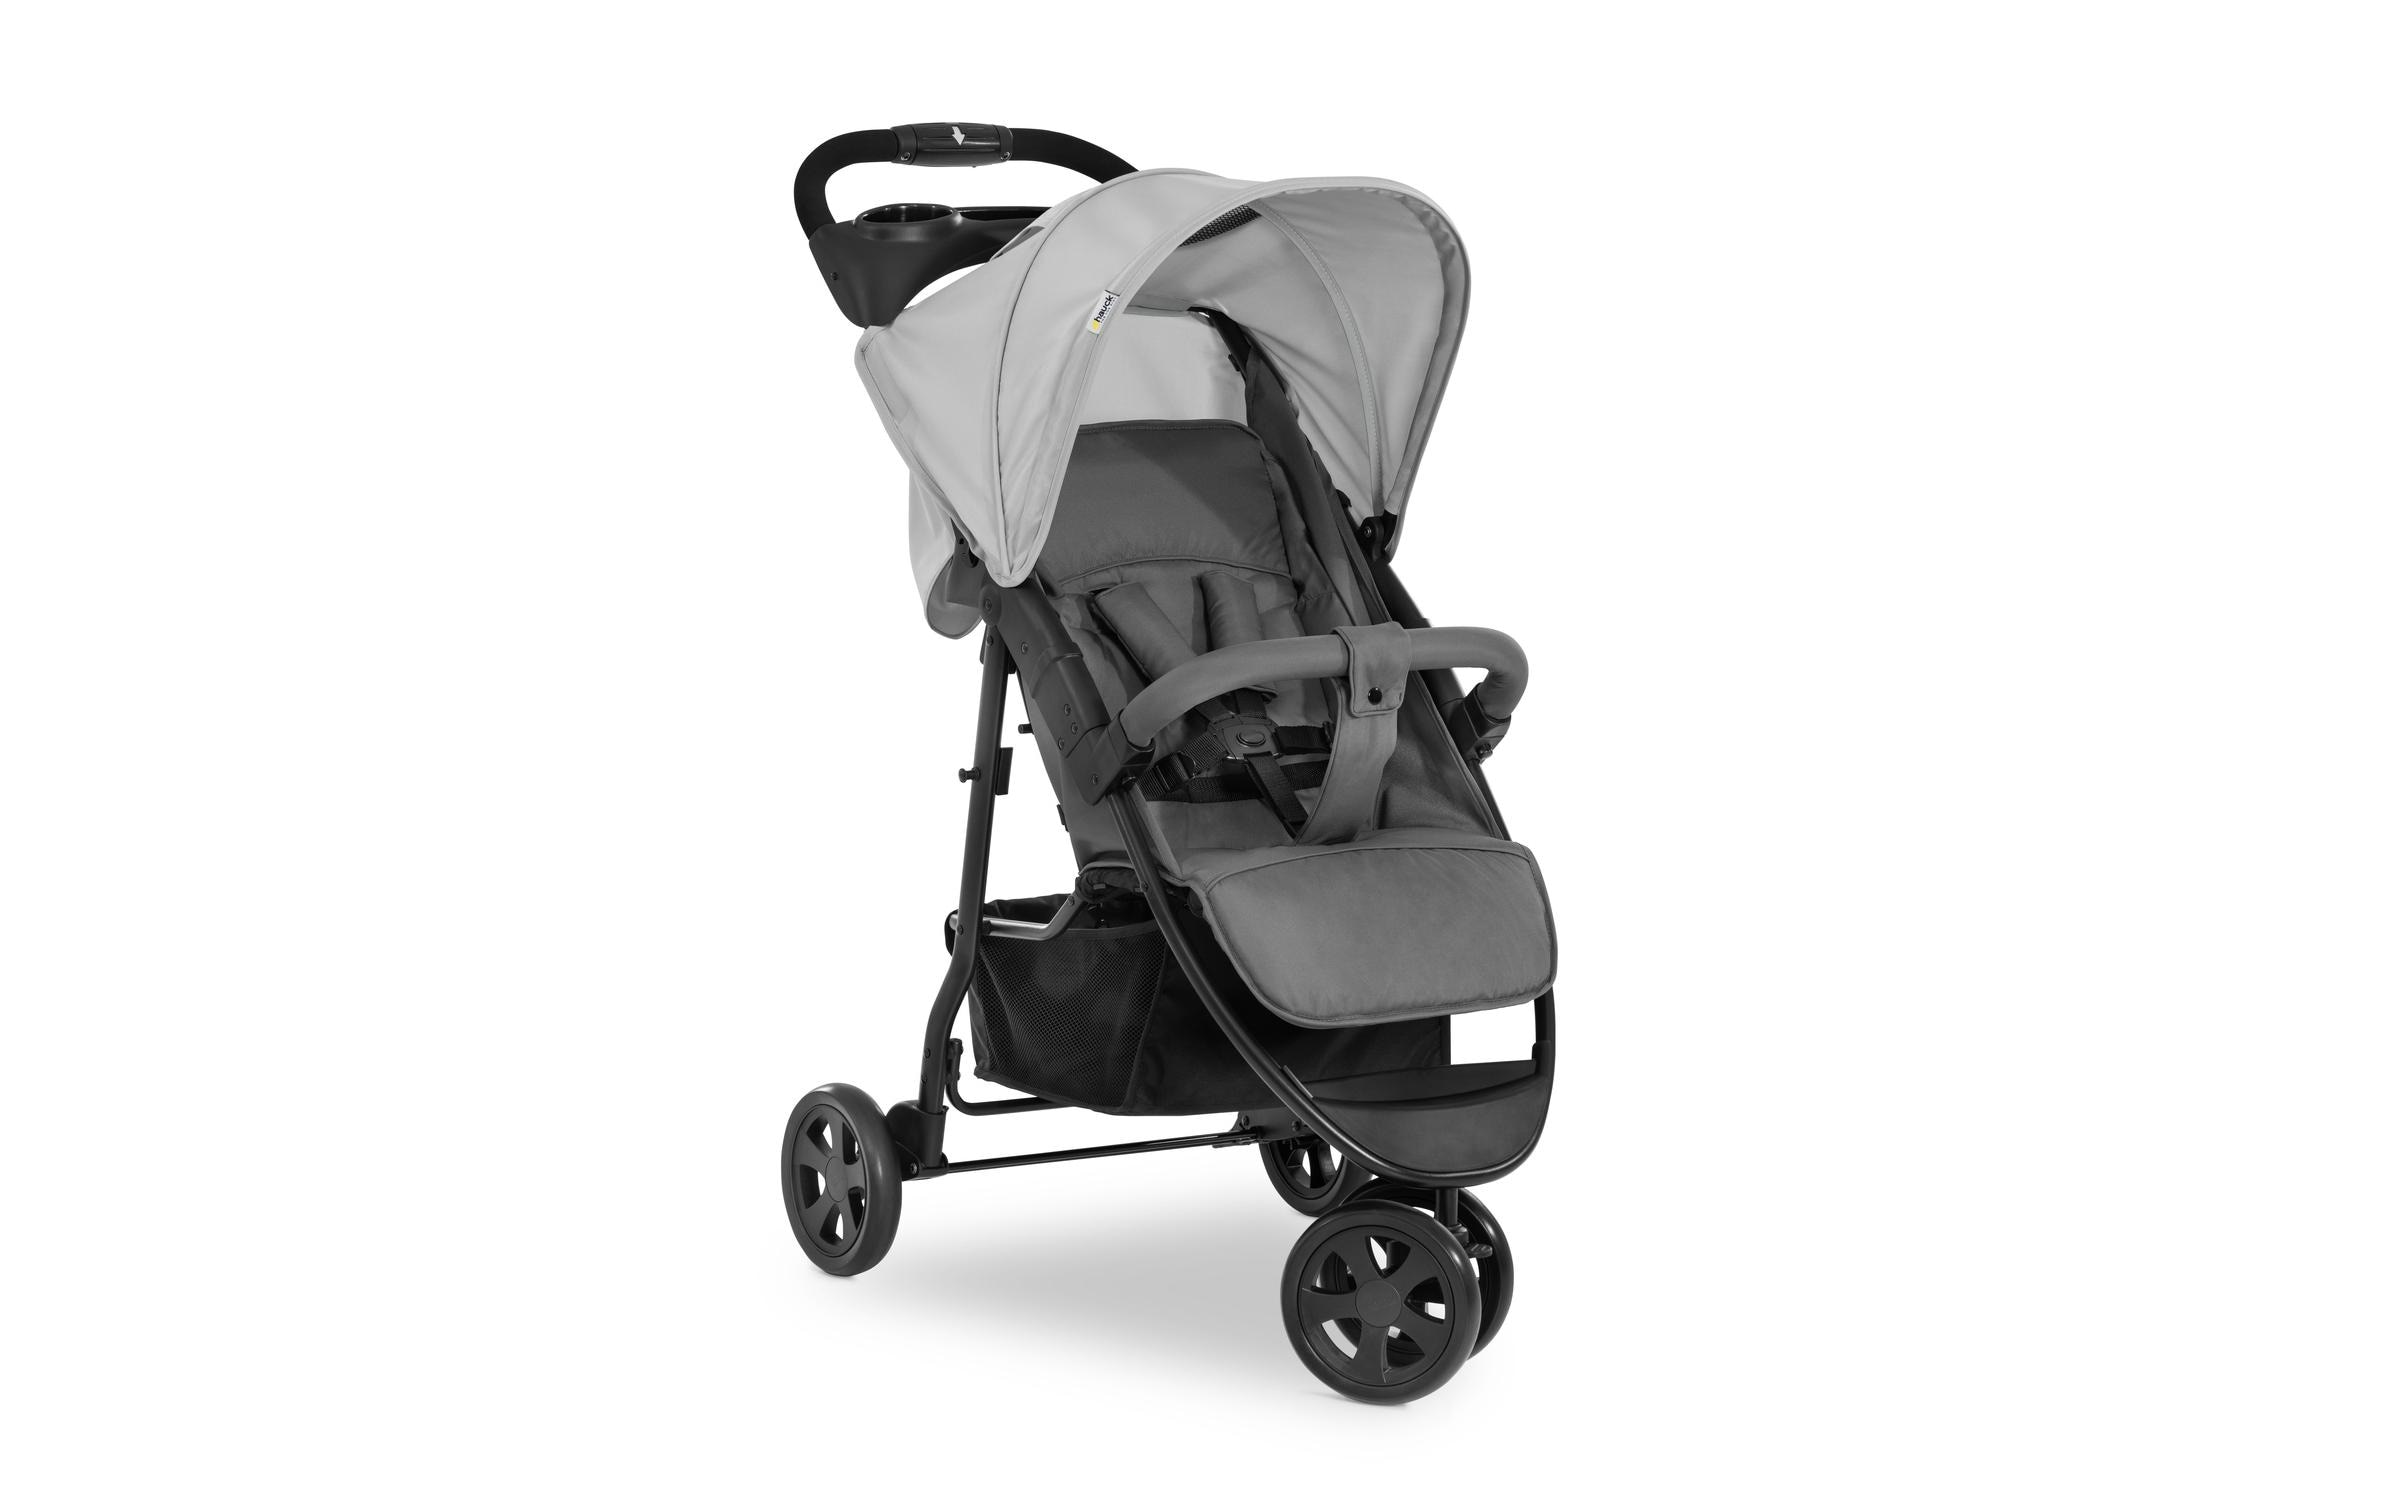 Kinder-Buggy »Hauck Buggy Citi Neo 3«, 25 kg